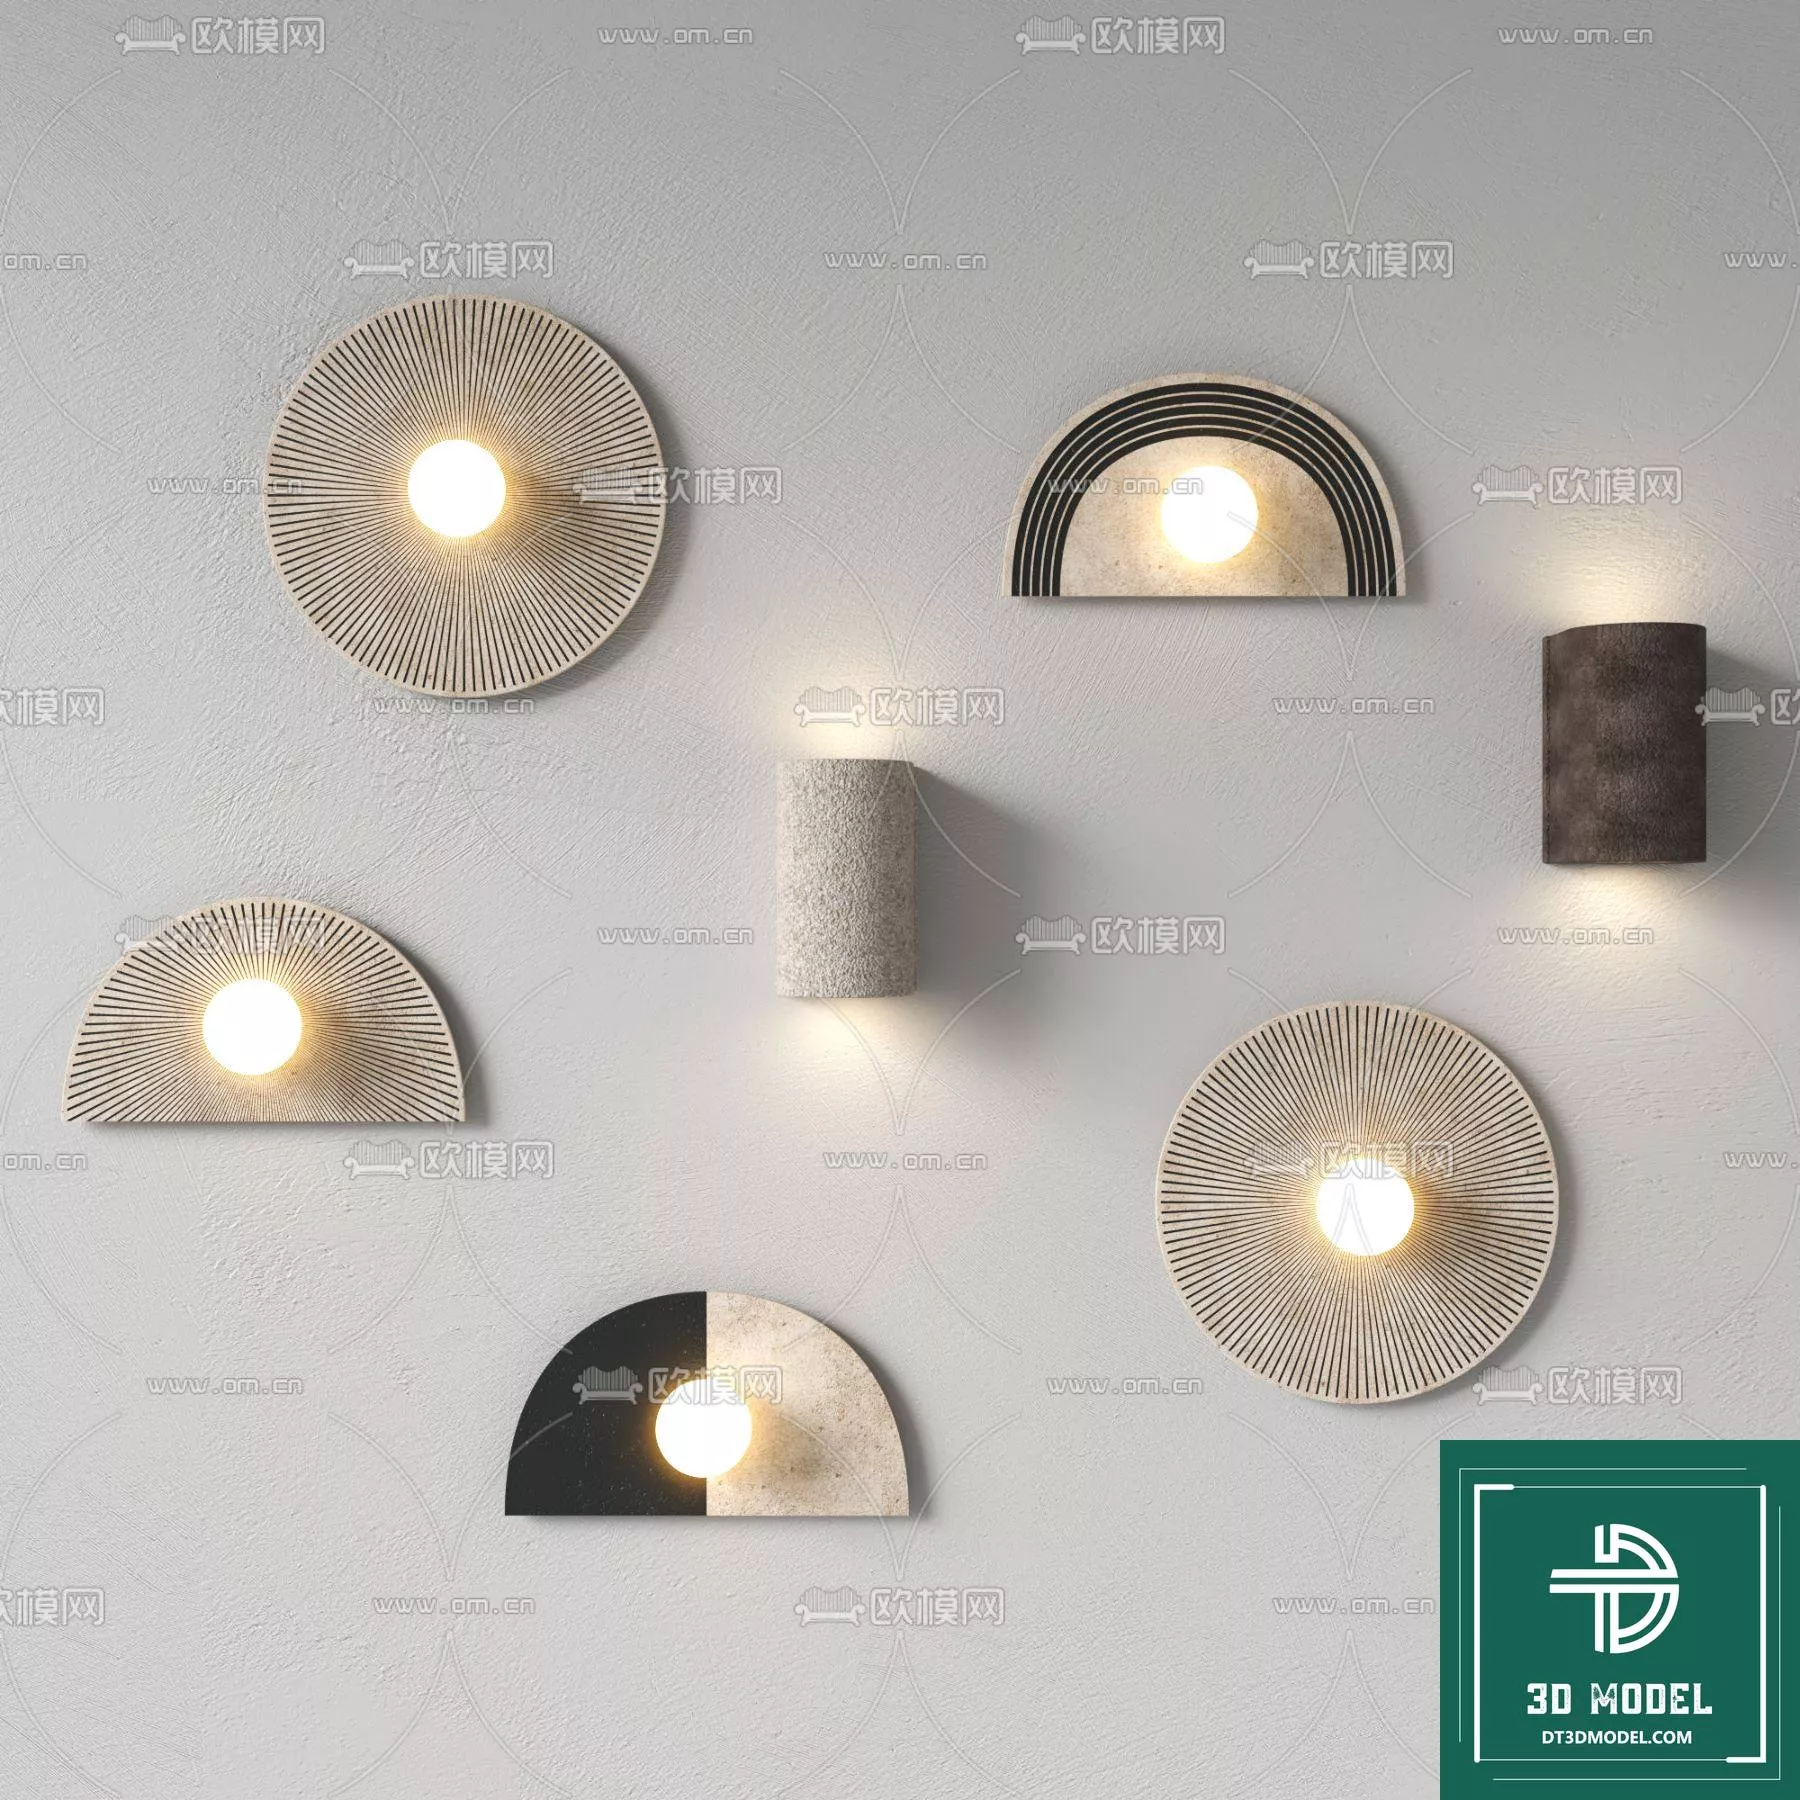 MODERN WALL LAMP - SKETCHUP 3D MODEL - VRAY OR ENSCAPE - ID16059